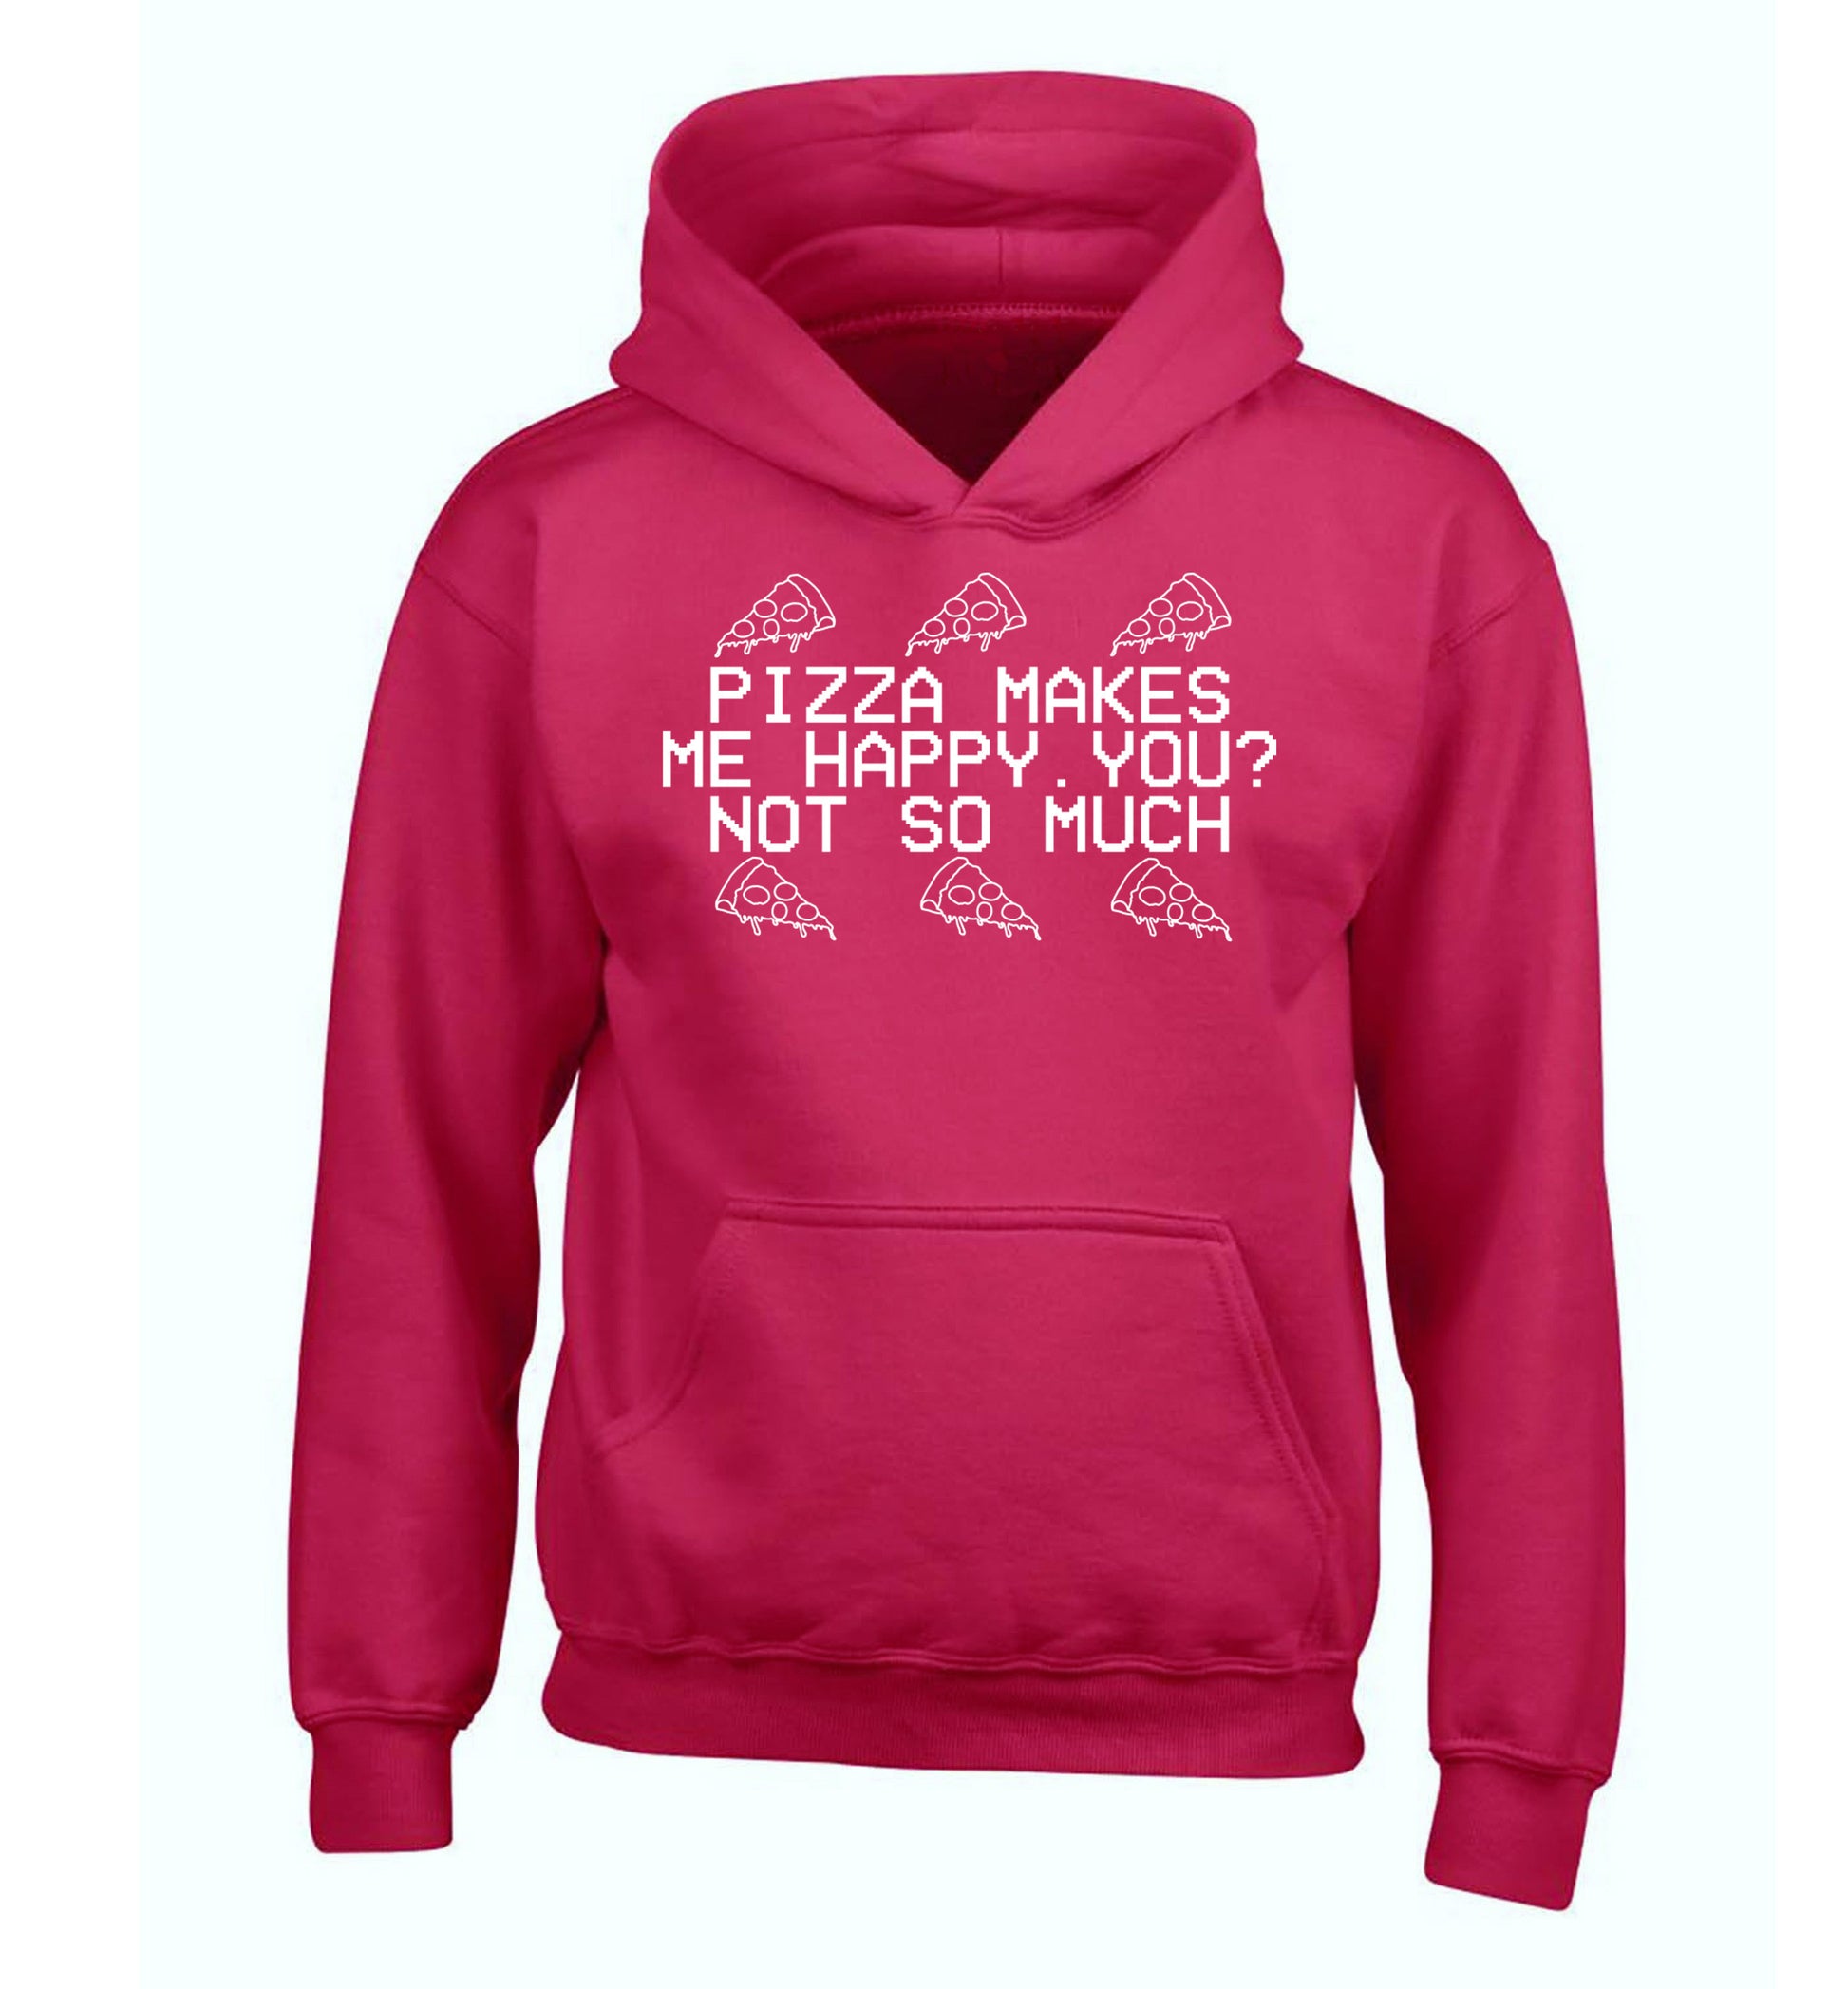 Pizza makes me happy, You? Not so much children's pink hoodie 12-14 Years